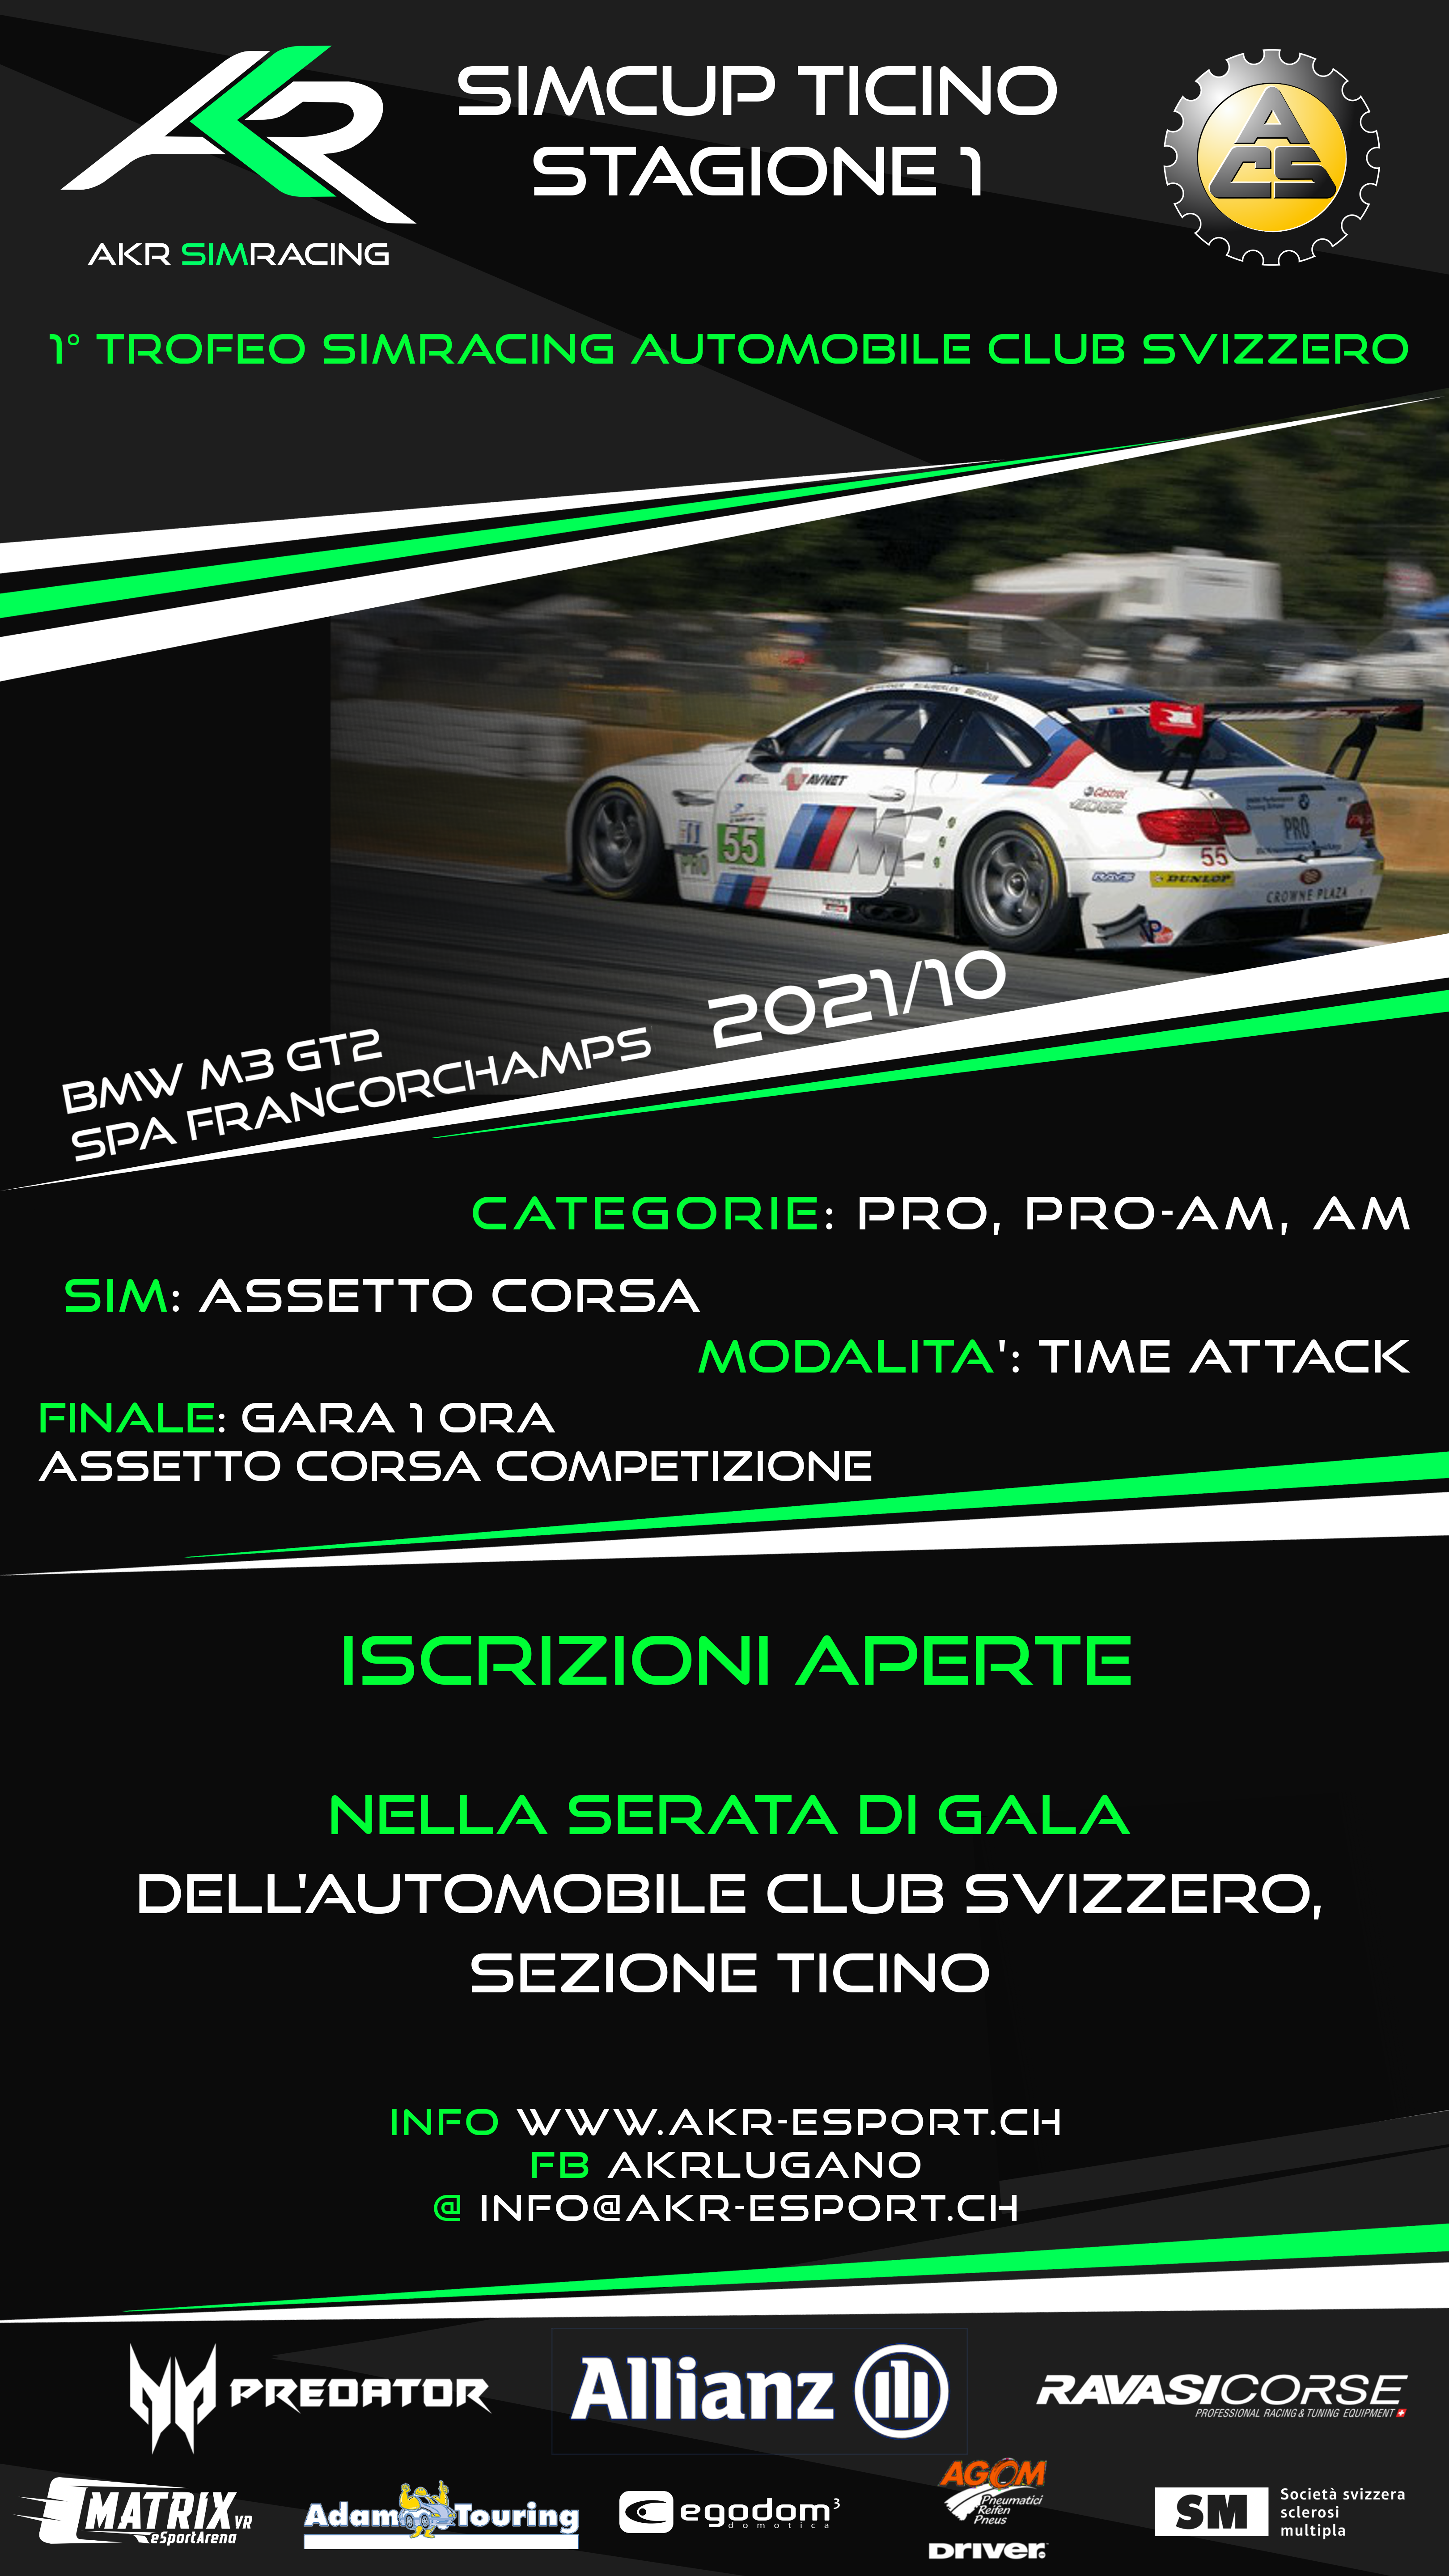 SIMCUP TICINO TCR